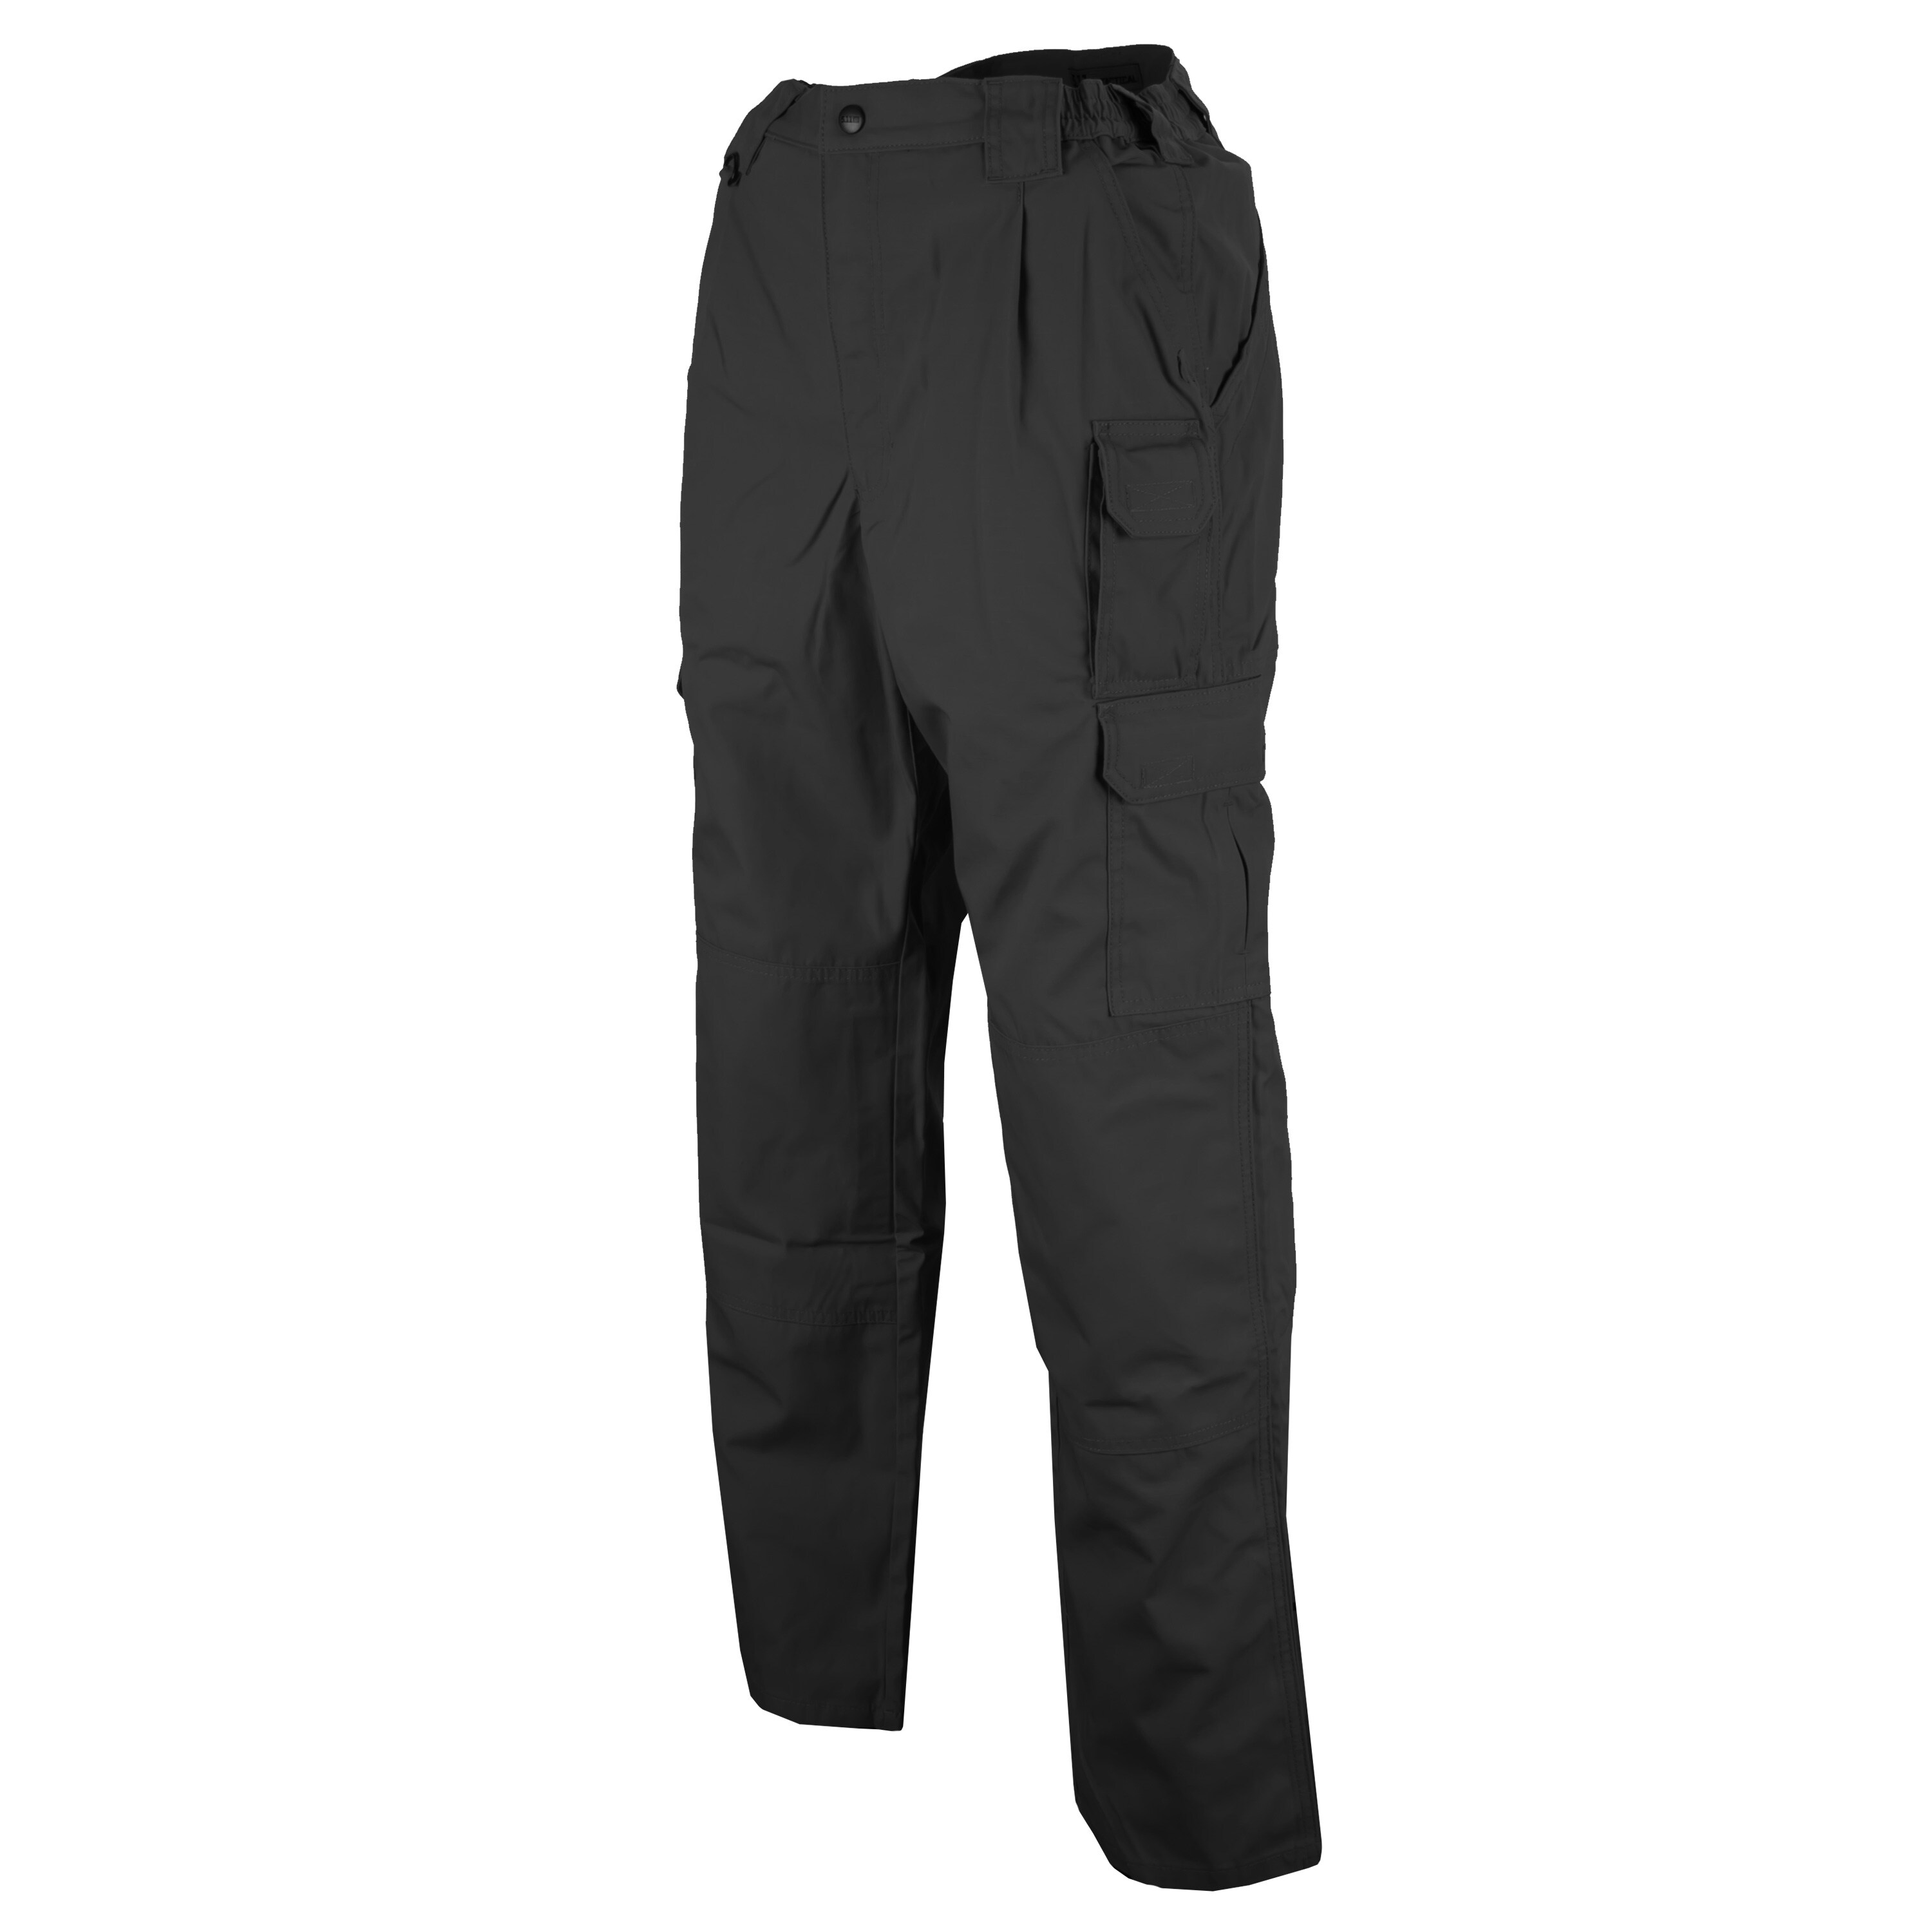 Purchase the 5.11 Taclite Pro Pants black by ASMC